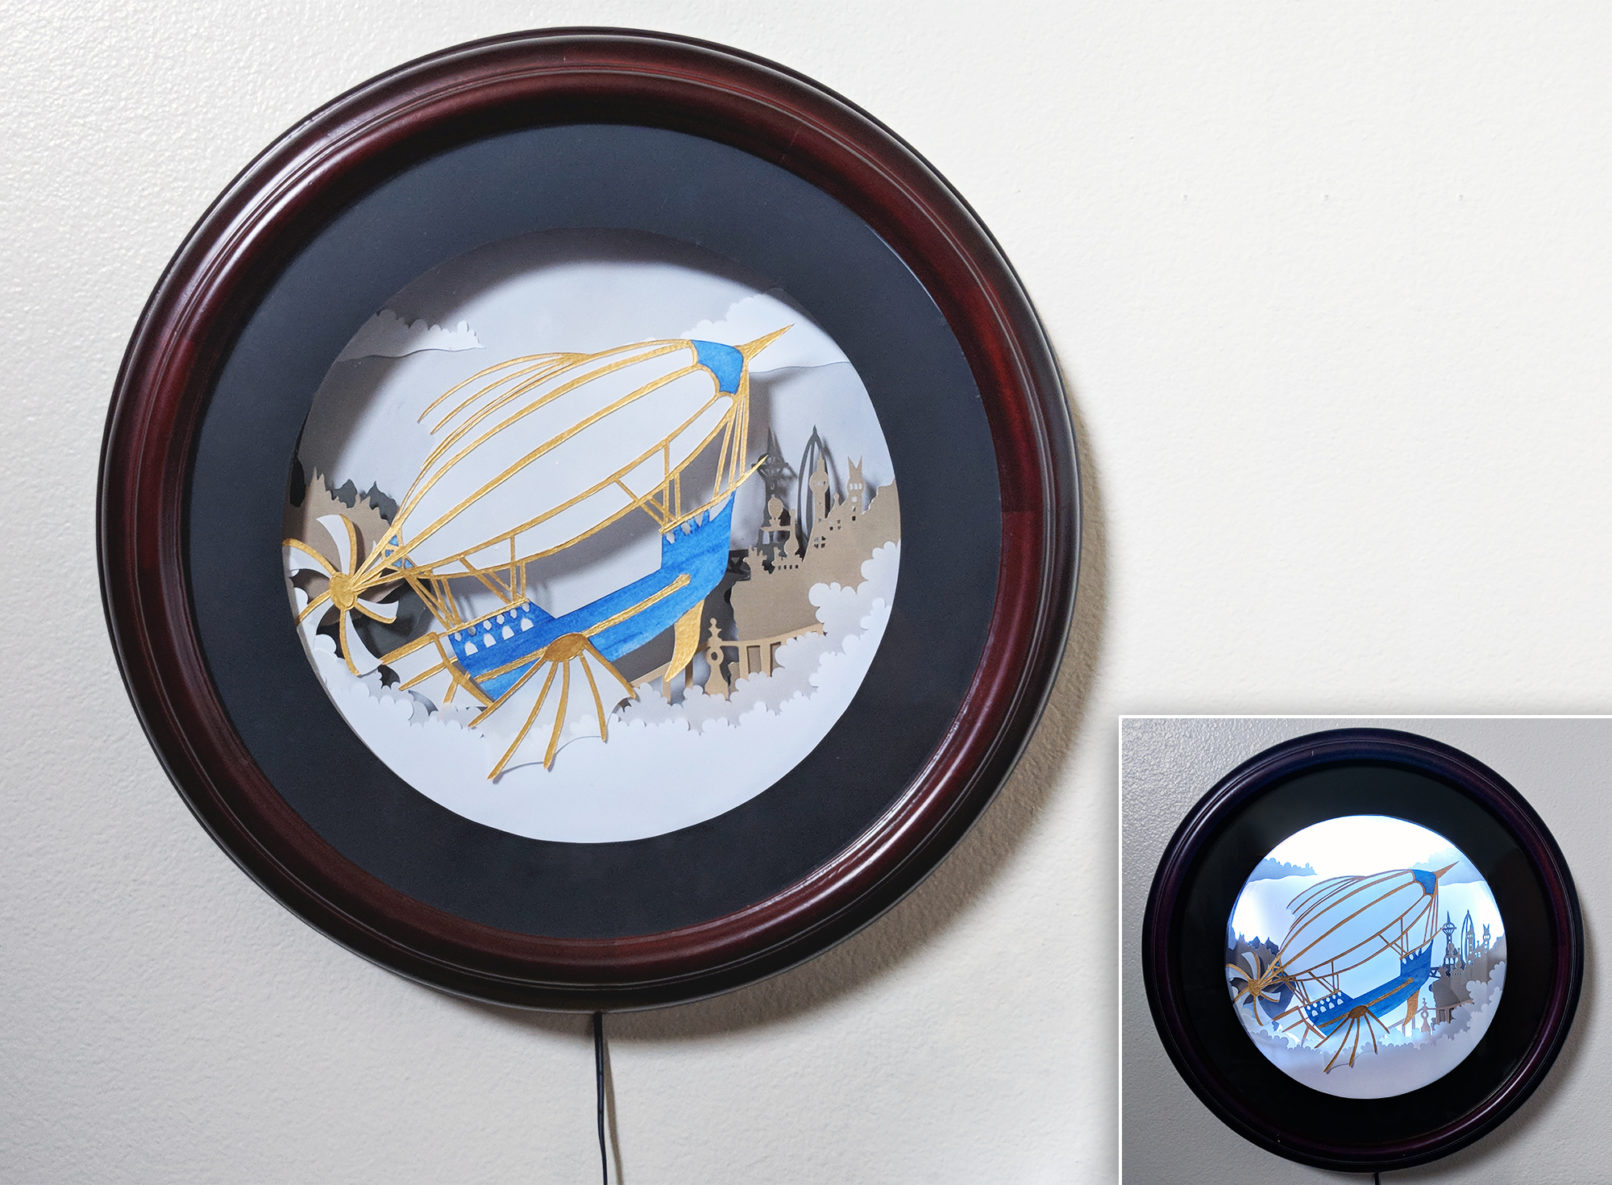 A hand cut paper art steampunk air ship with a city in the background in acircular shadowbox frame.